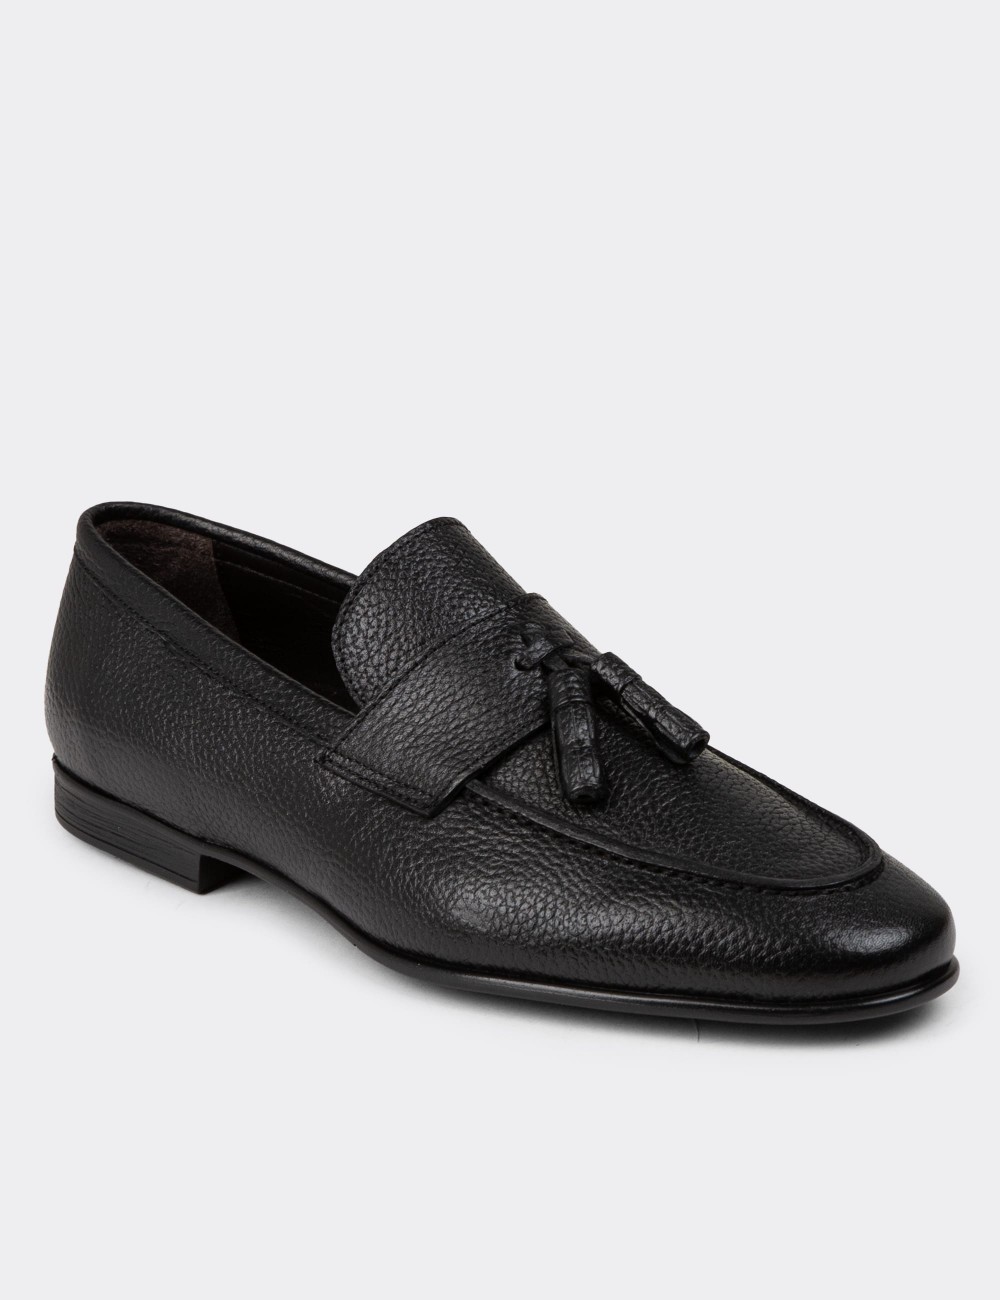 Black Leather Loafers - 01989MSYHC01